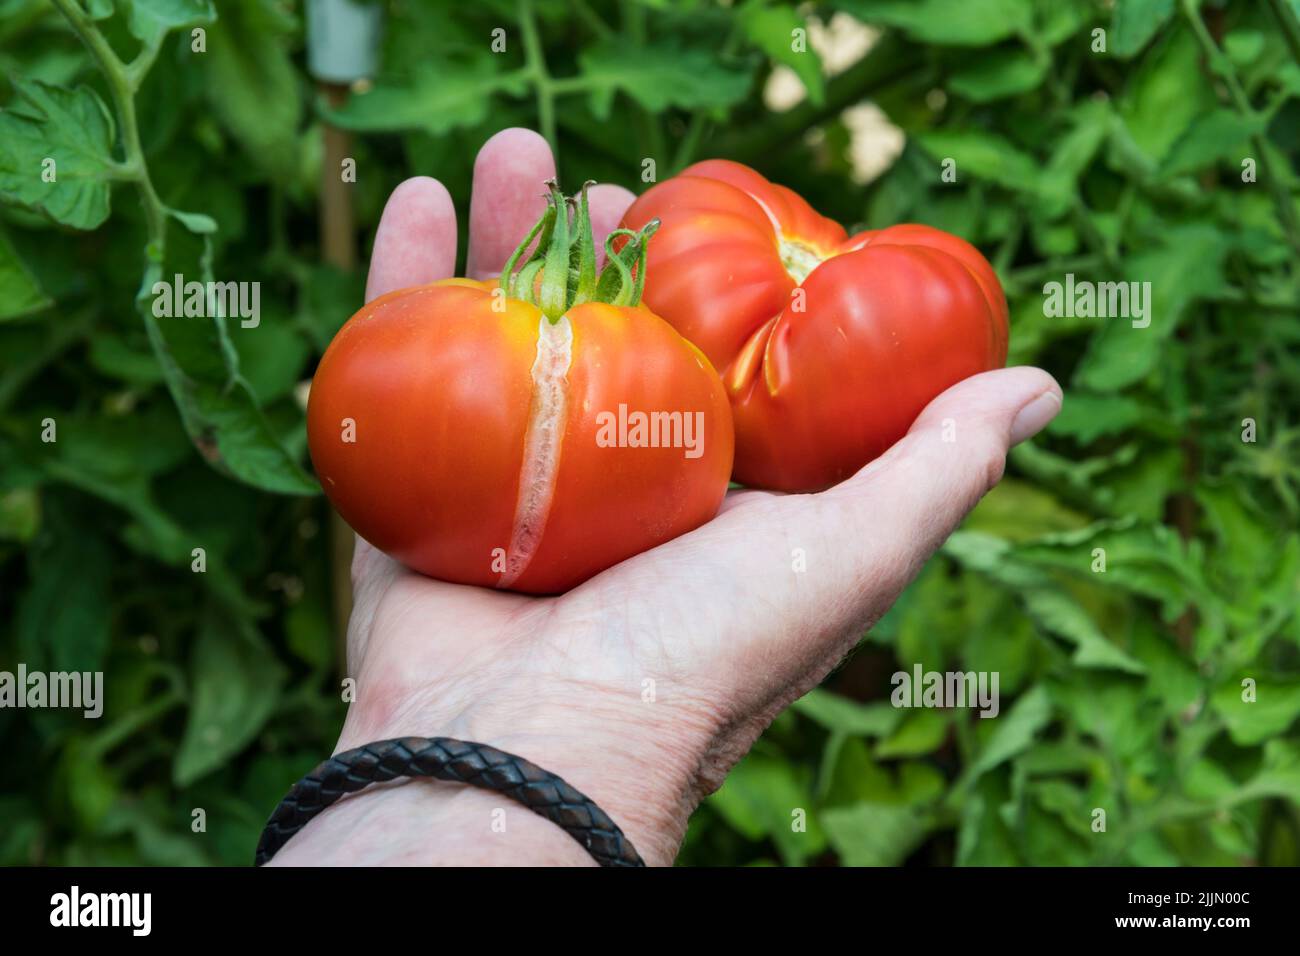 Vertical split in skin of freshly picked marmande tomato caused by irregular watering - excessive dry period or drought followed by watering. Stock Photo